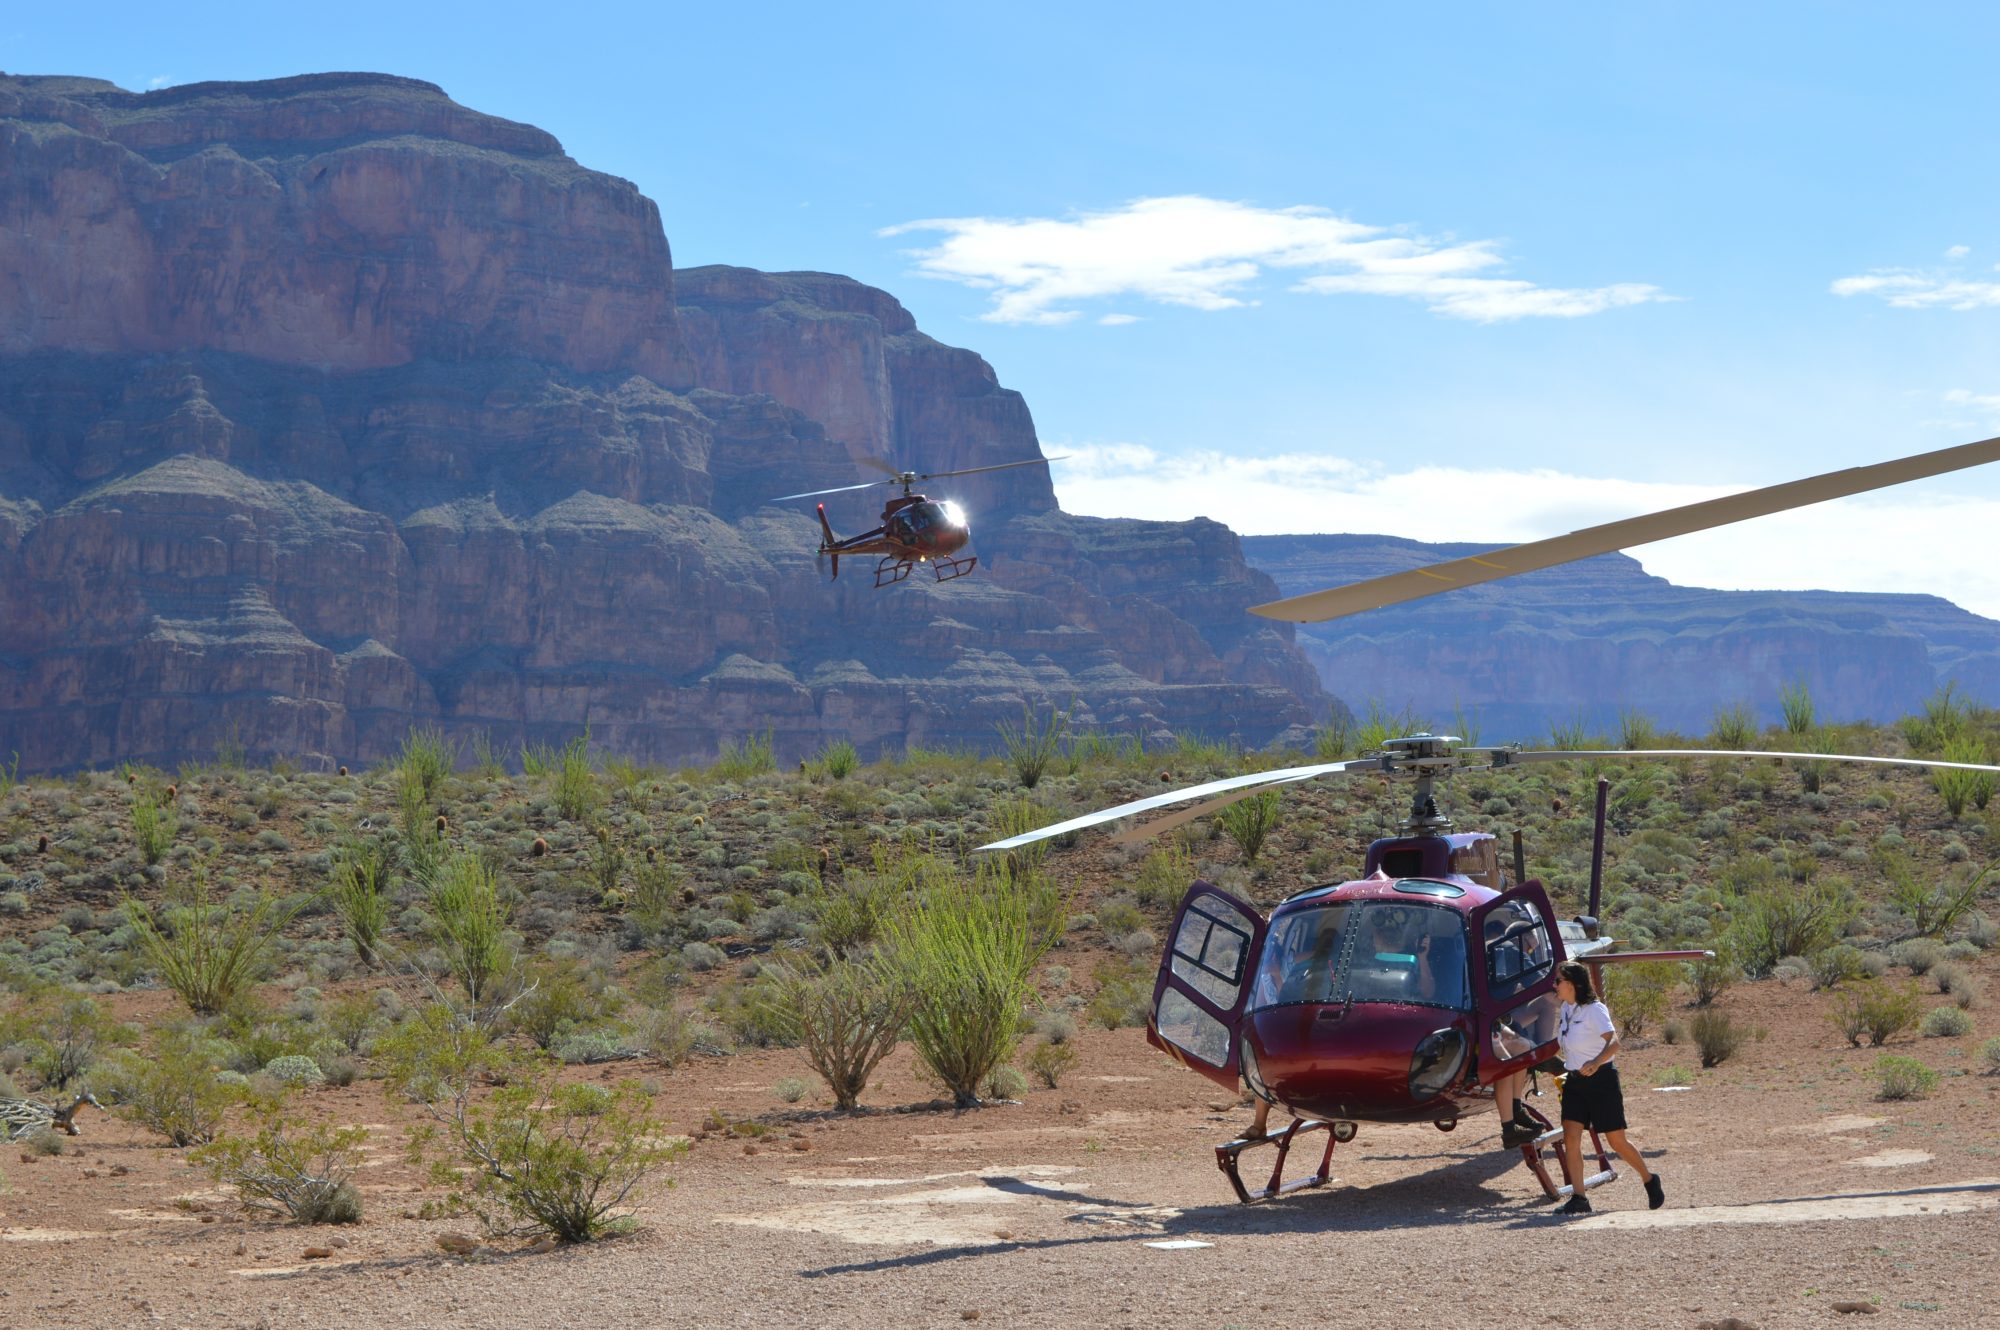 Helicopter tour of the Grand Canyon